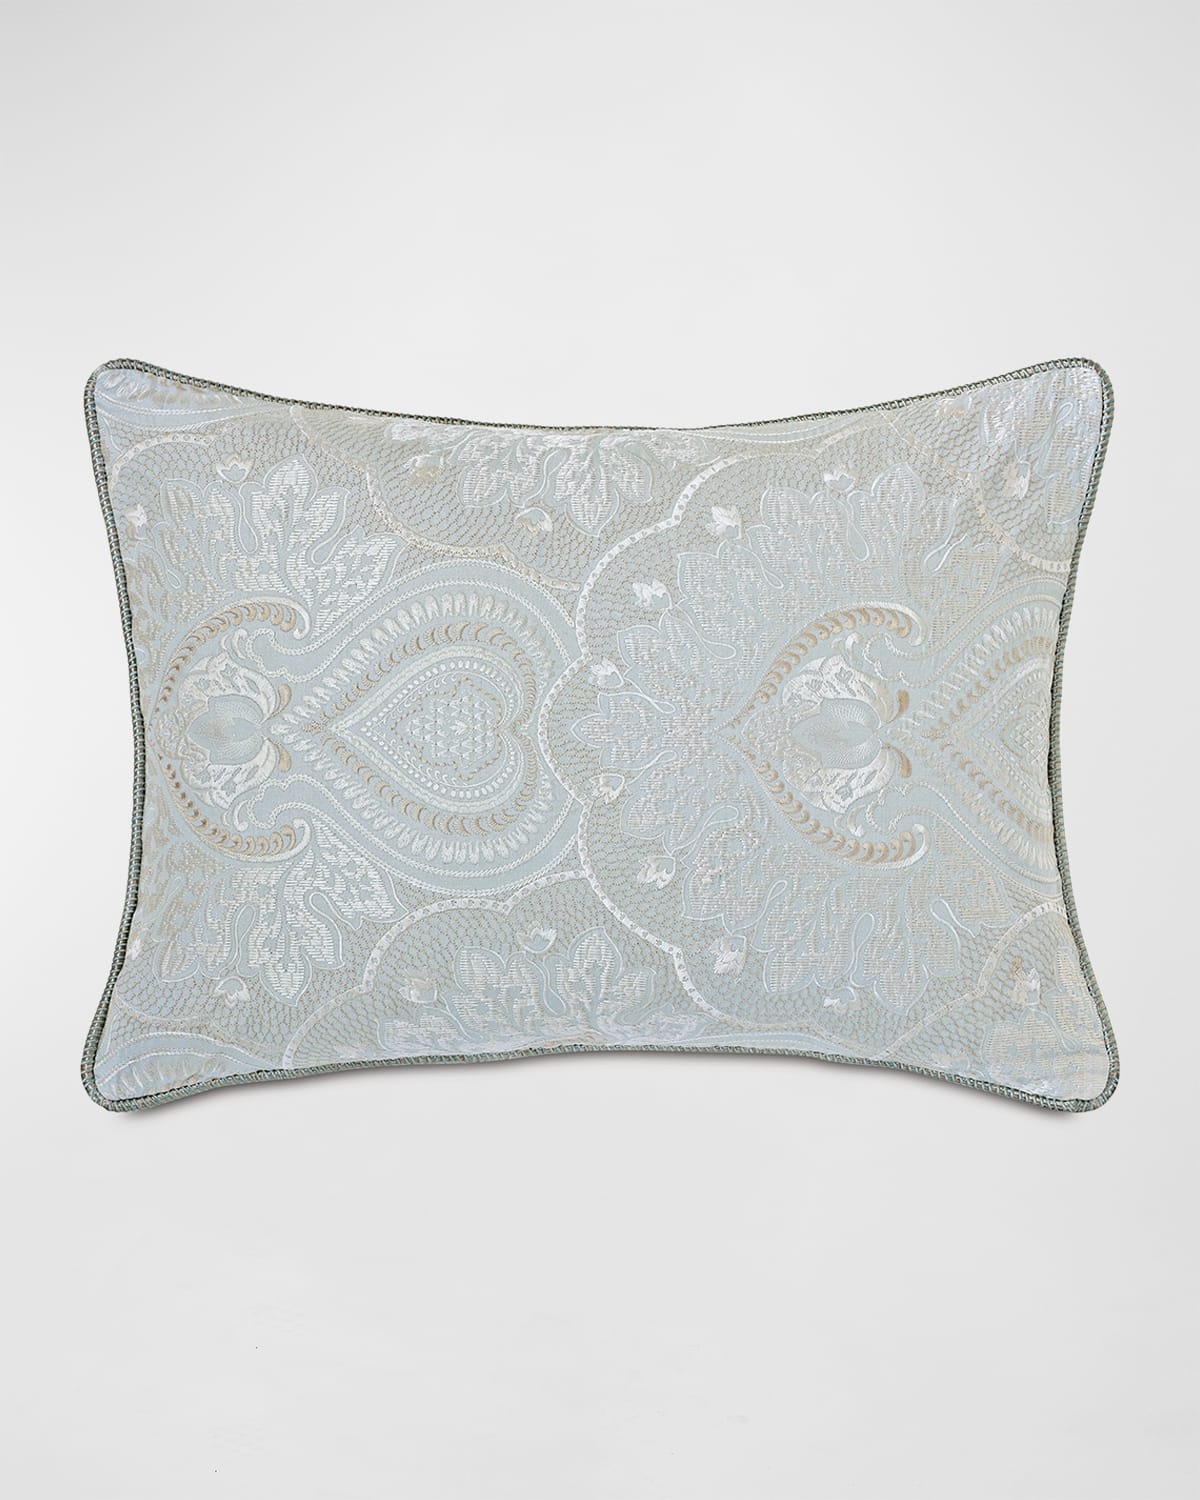 Eastern Accents Danae Embroidered Decorative Pillow In Gray